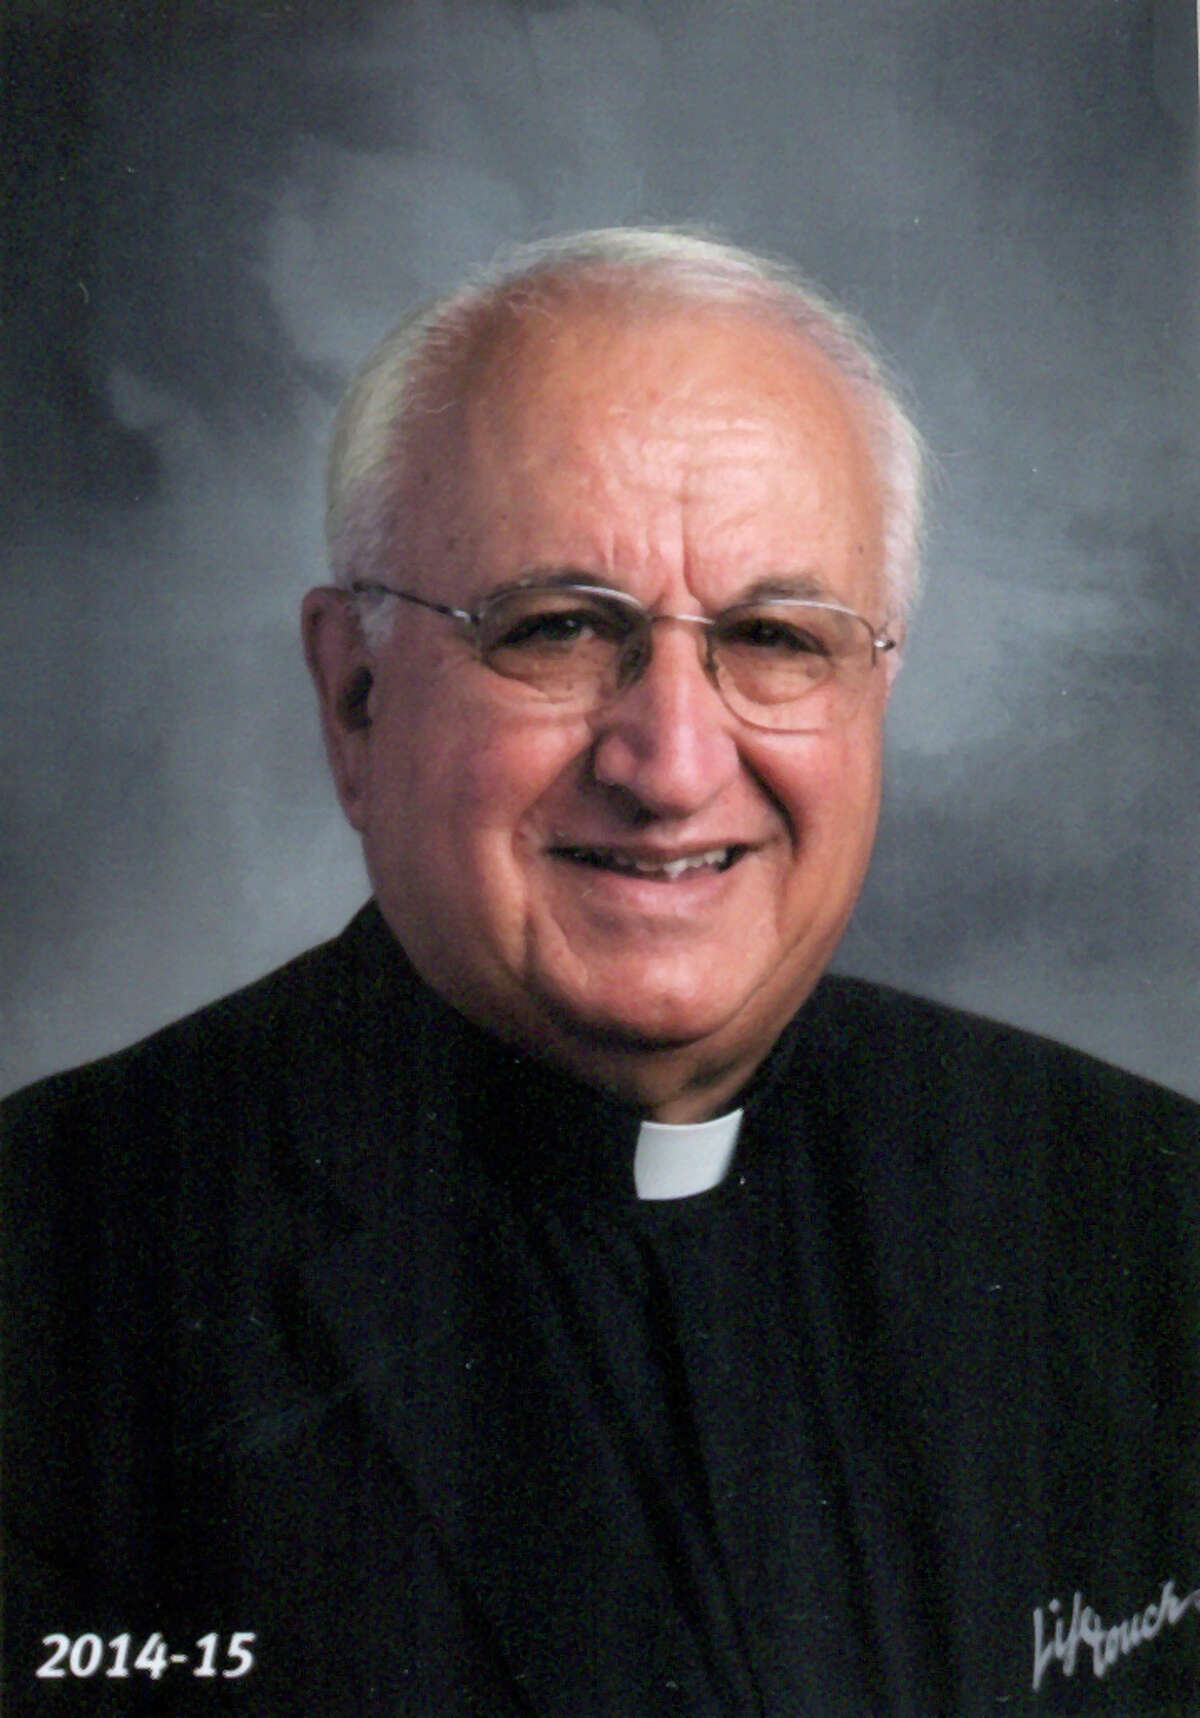 Rev. Michael Farano, a long-time priest and heavily-involved community member in the Albany area, died Wednesday at the age of 78.